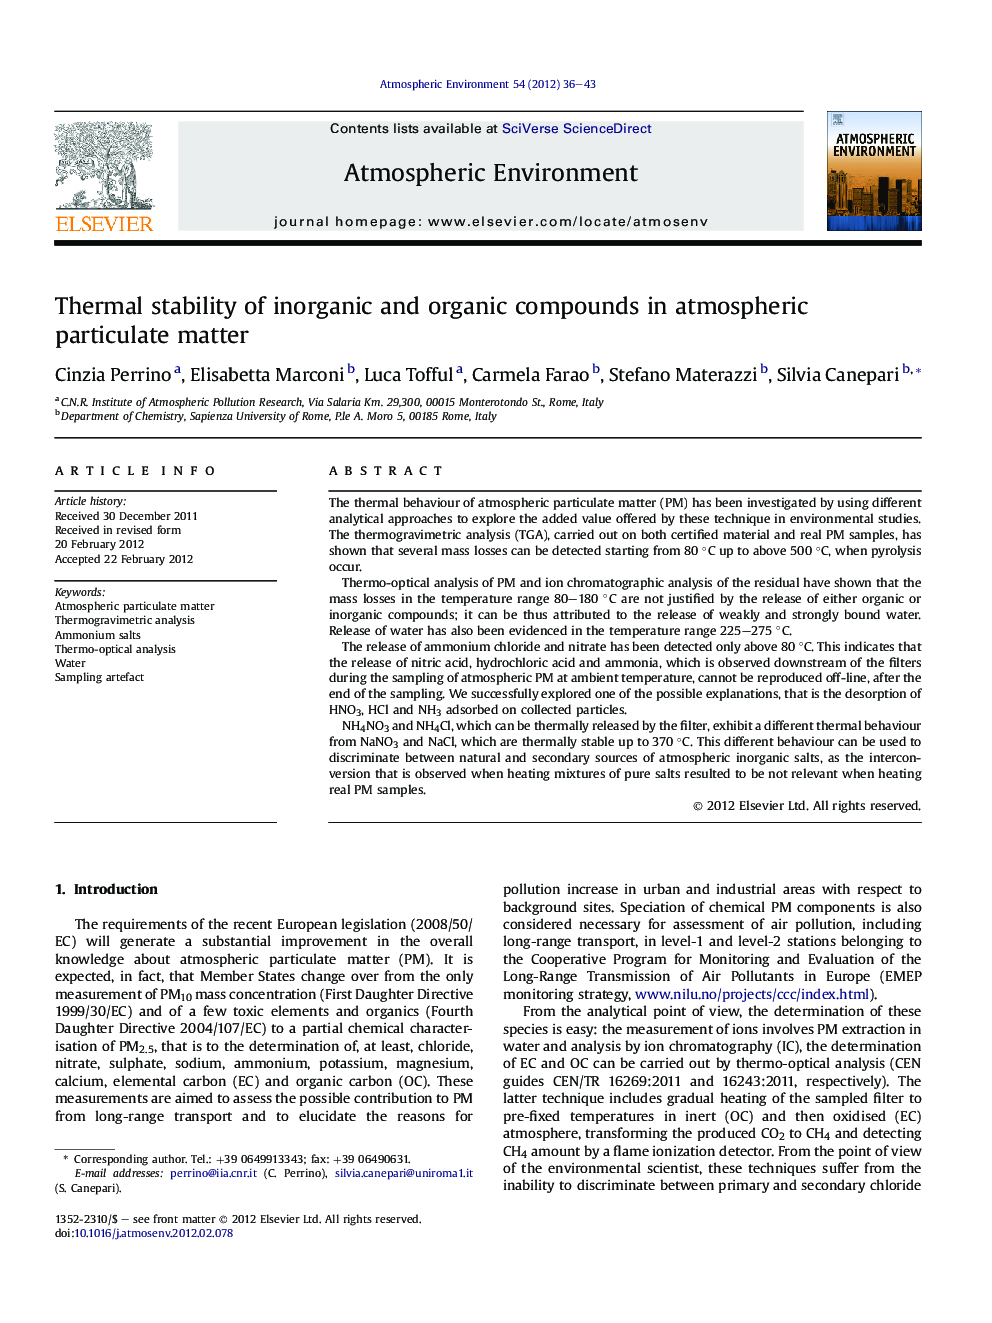 Thermal stability of inorganic and organic compounds in atmospheric particulate matter